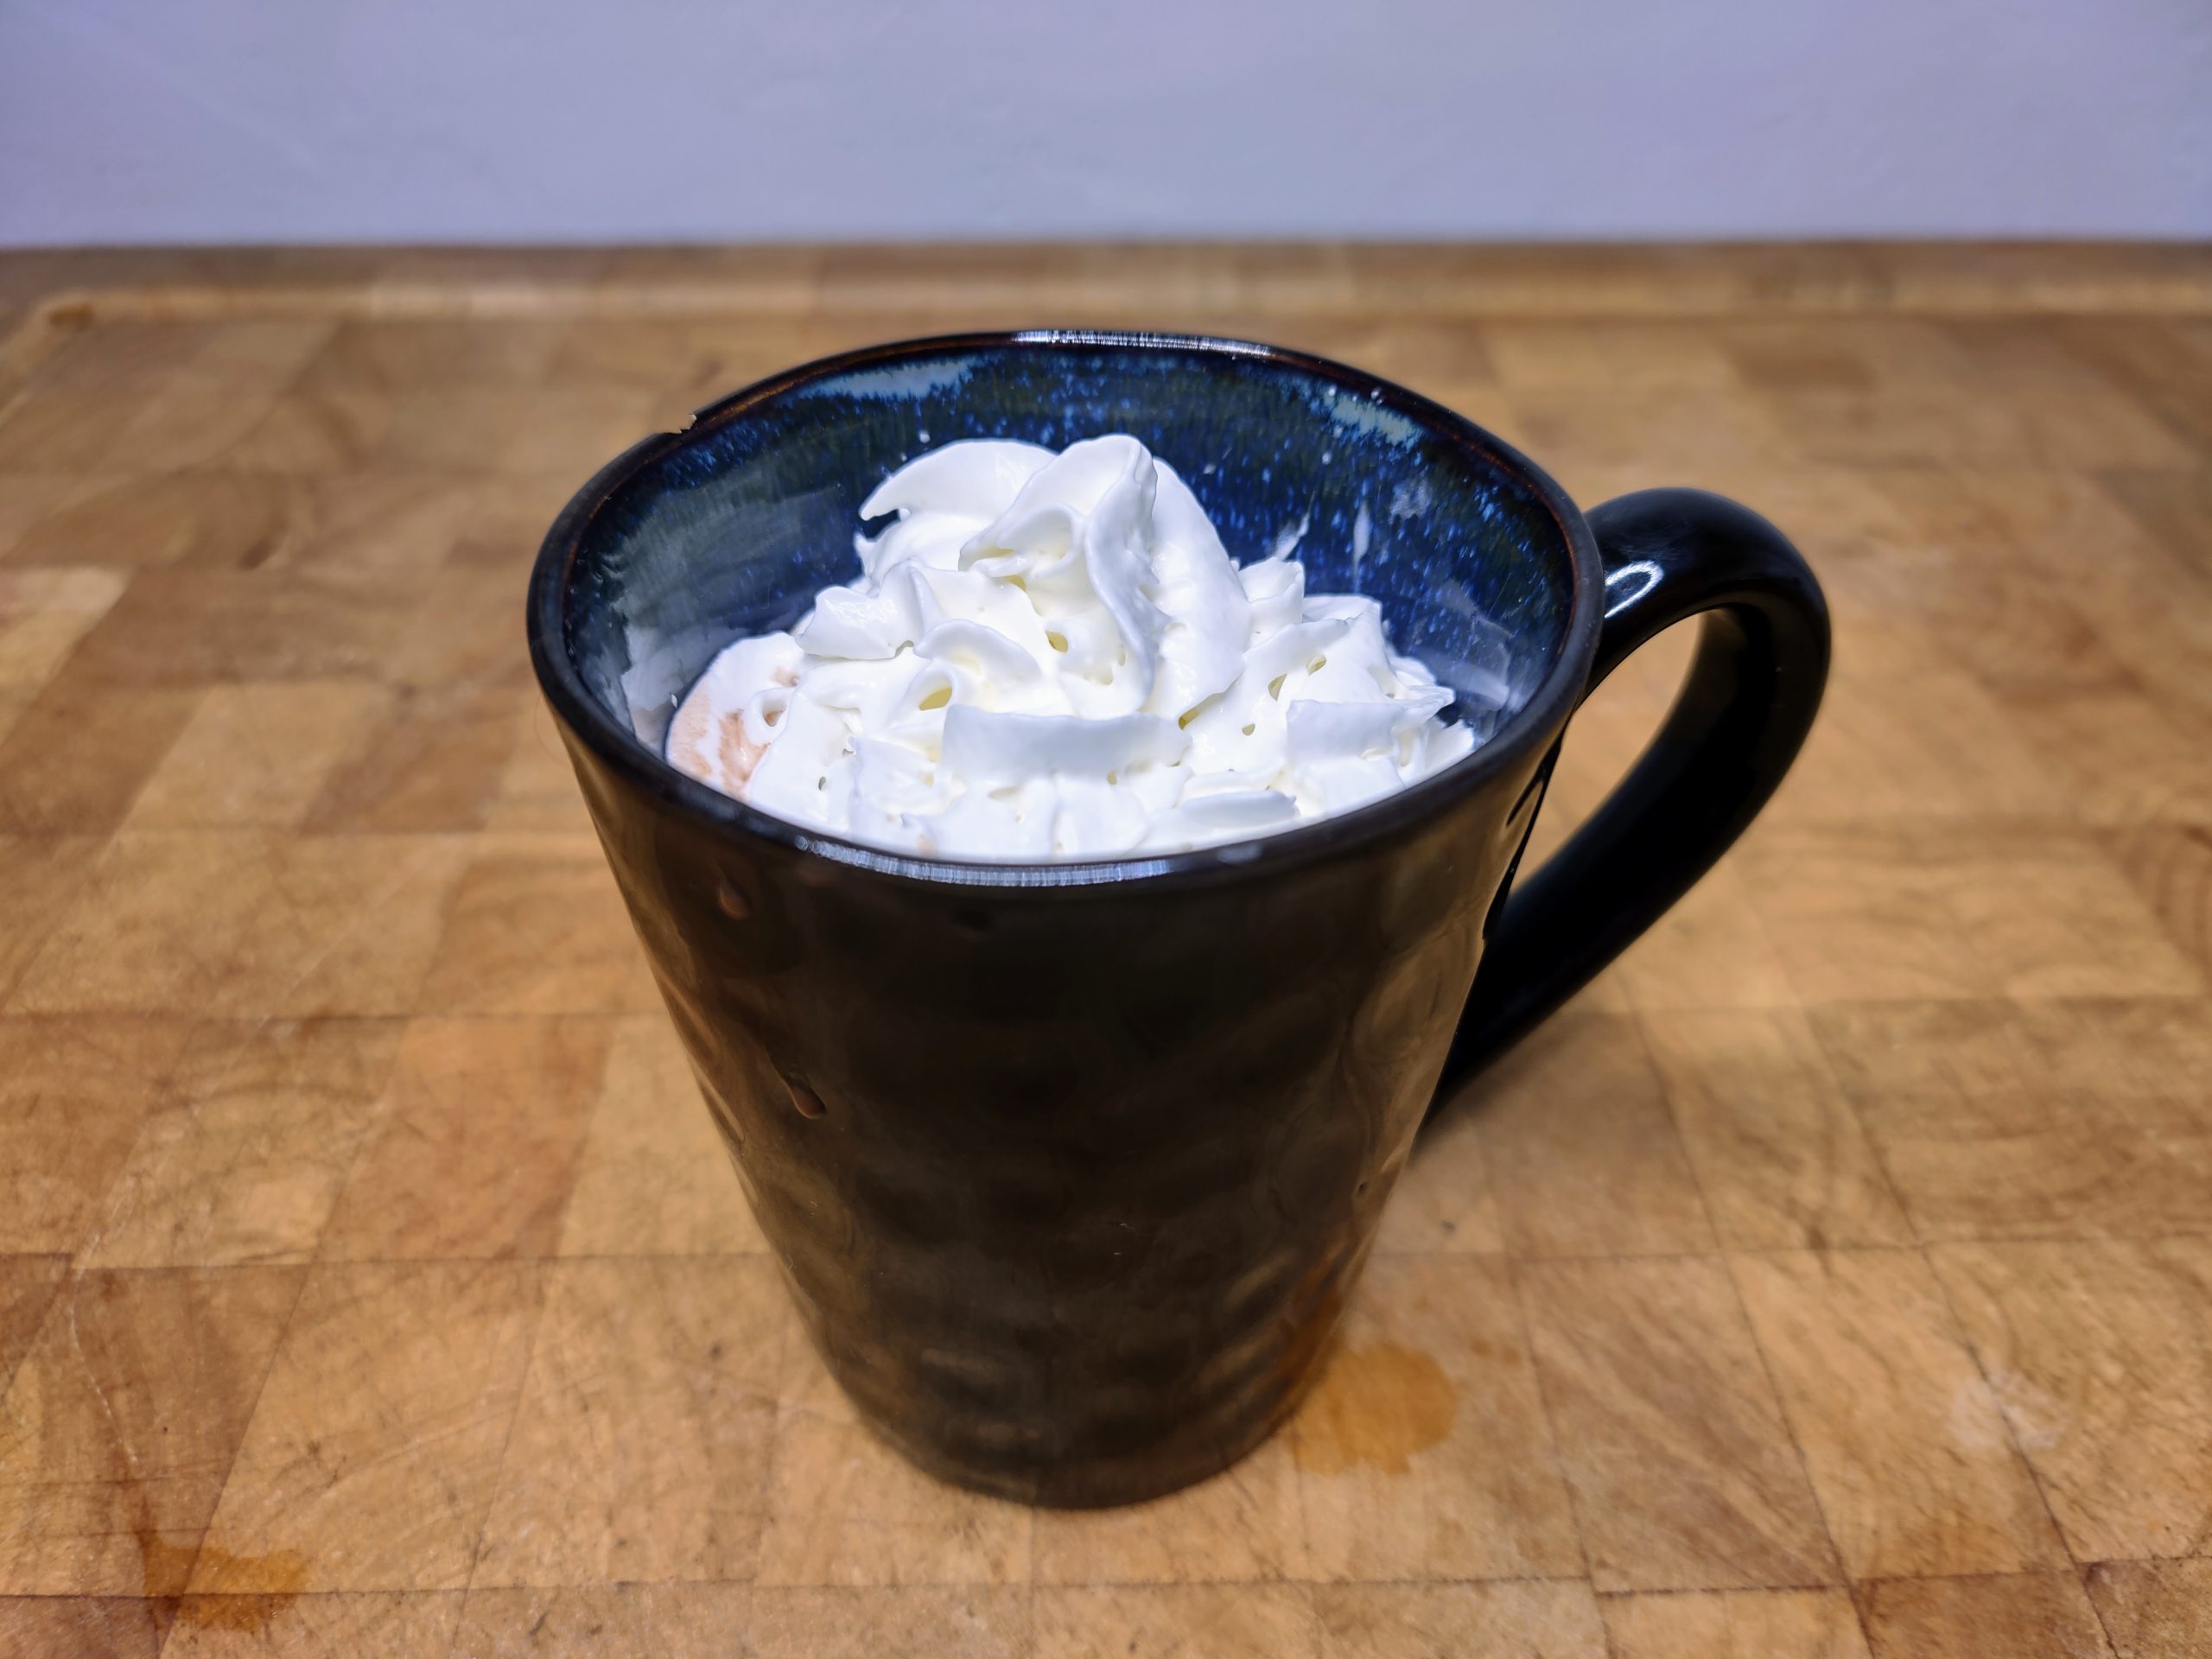 Rum hot chocolate in a blue mug topped with whipped cream on a wooden table.